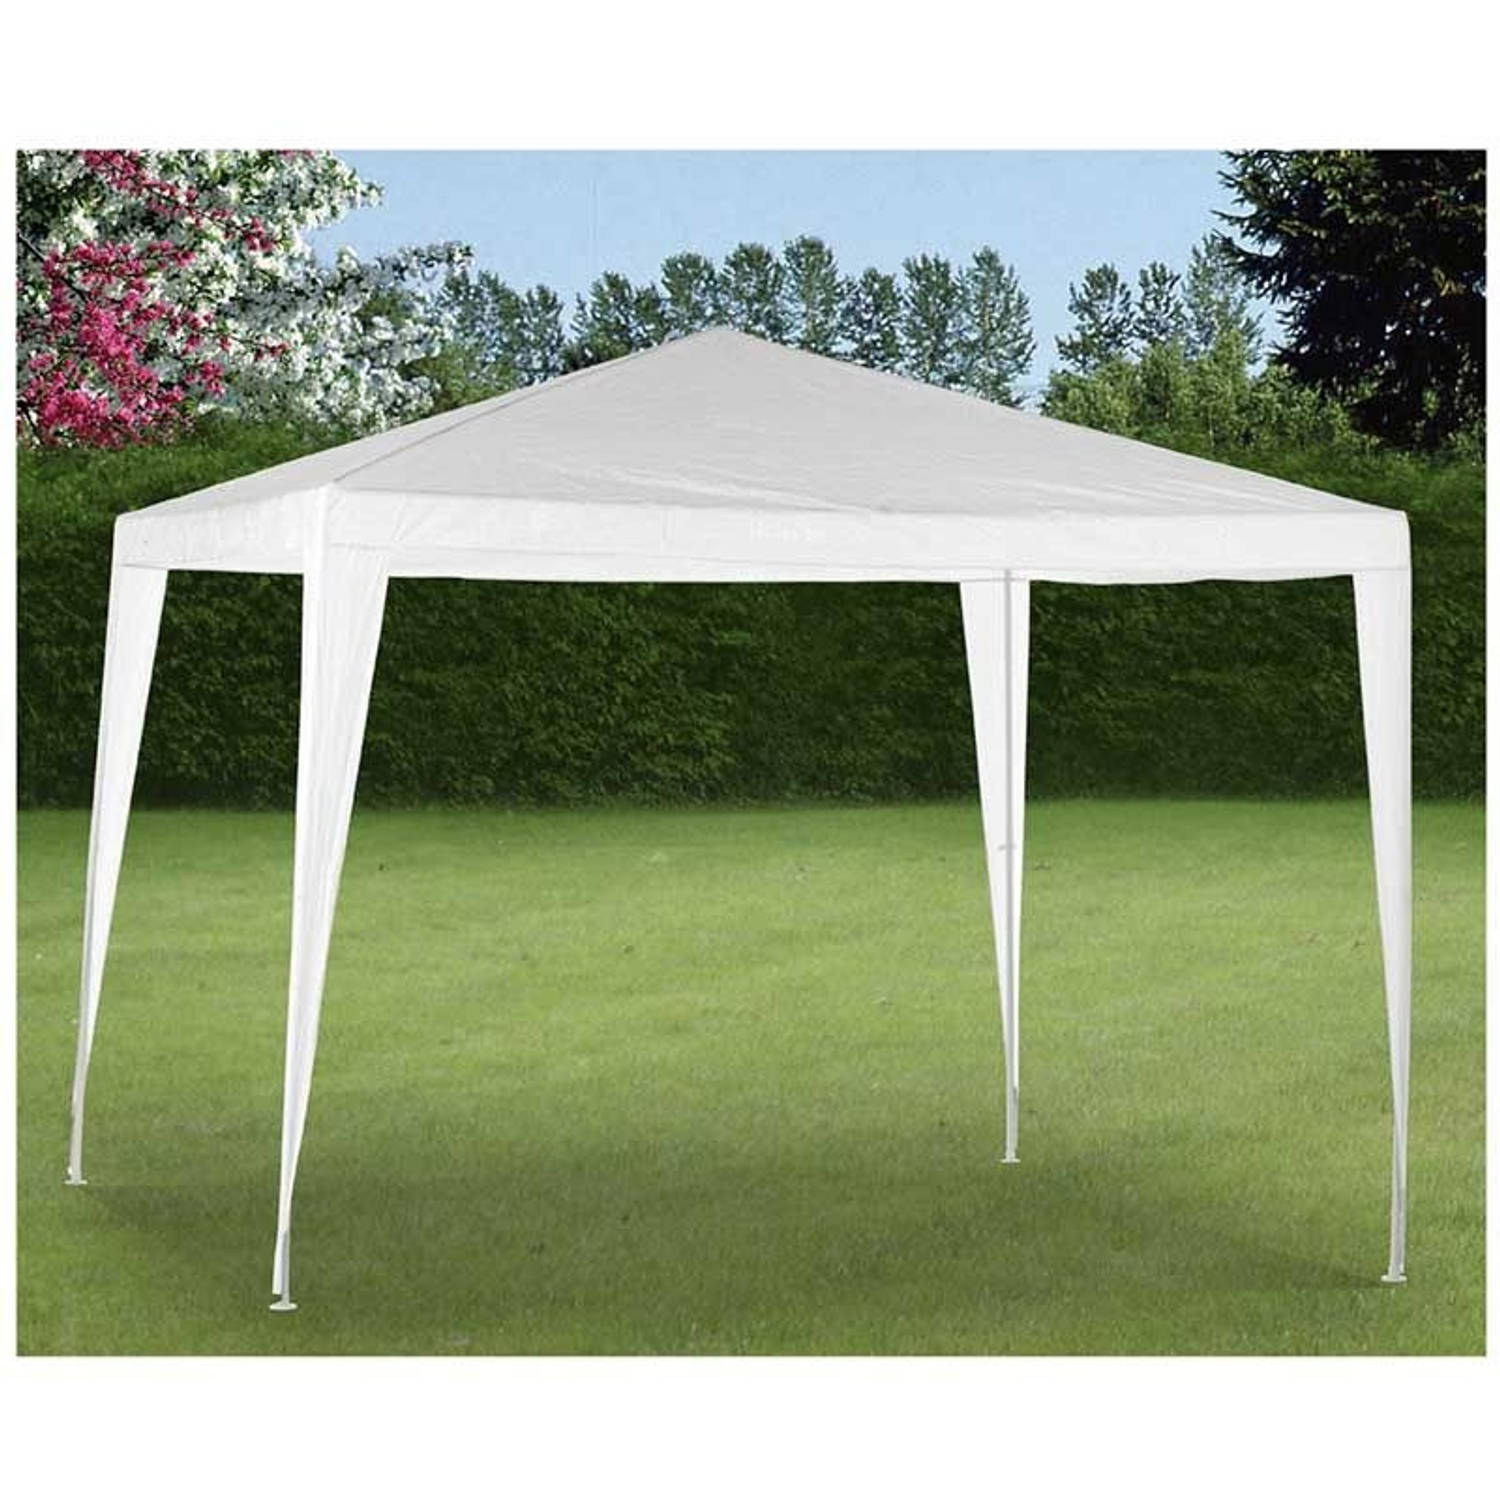 Ambiance Partytent 3x3 x2,45 meter - Wit |